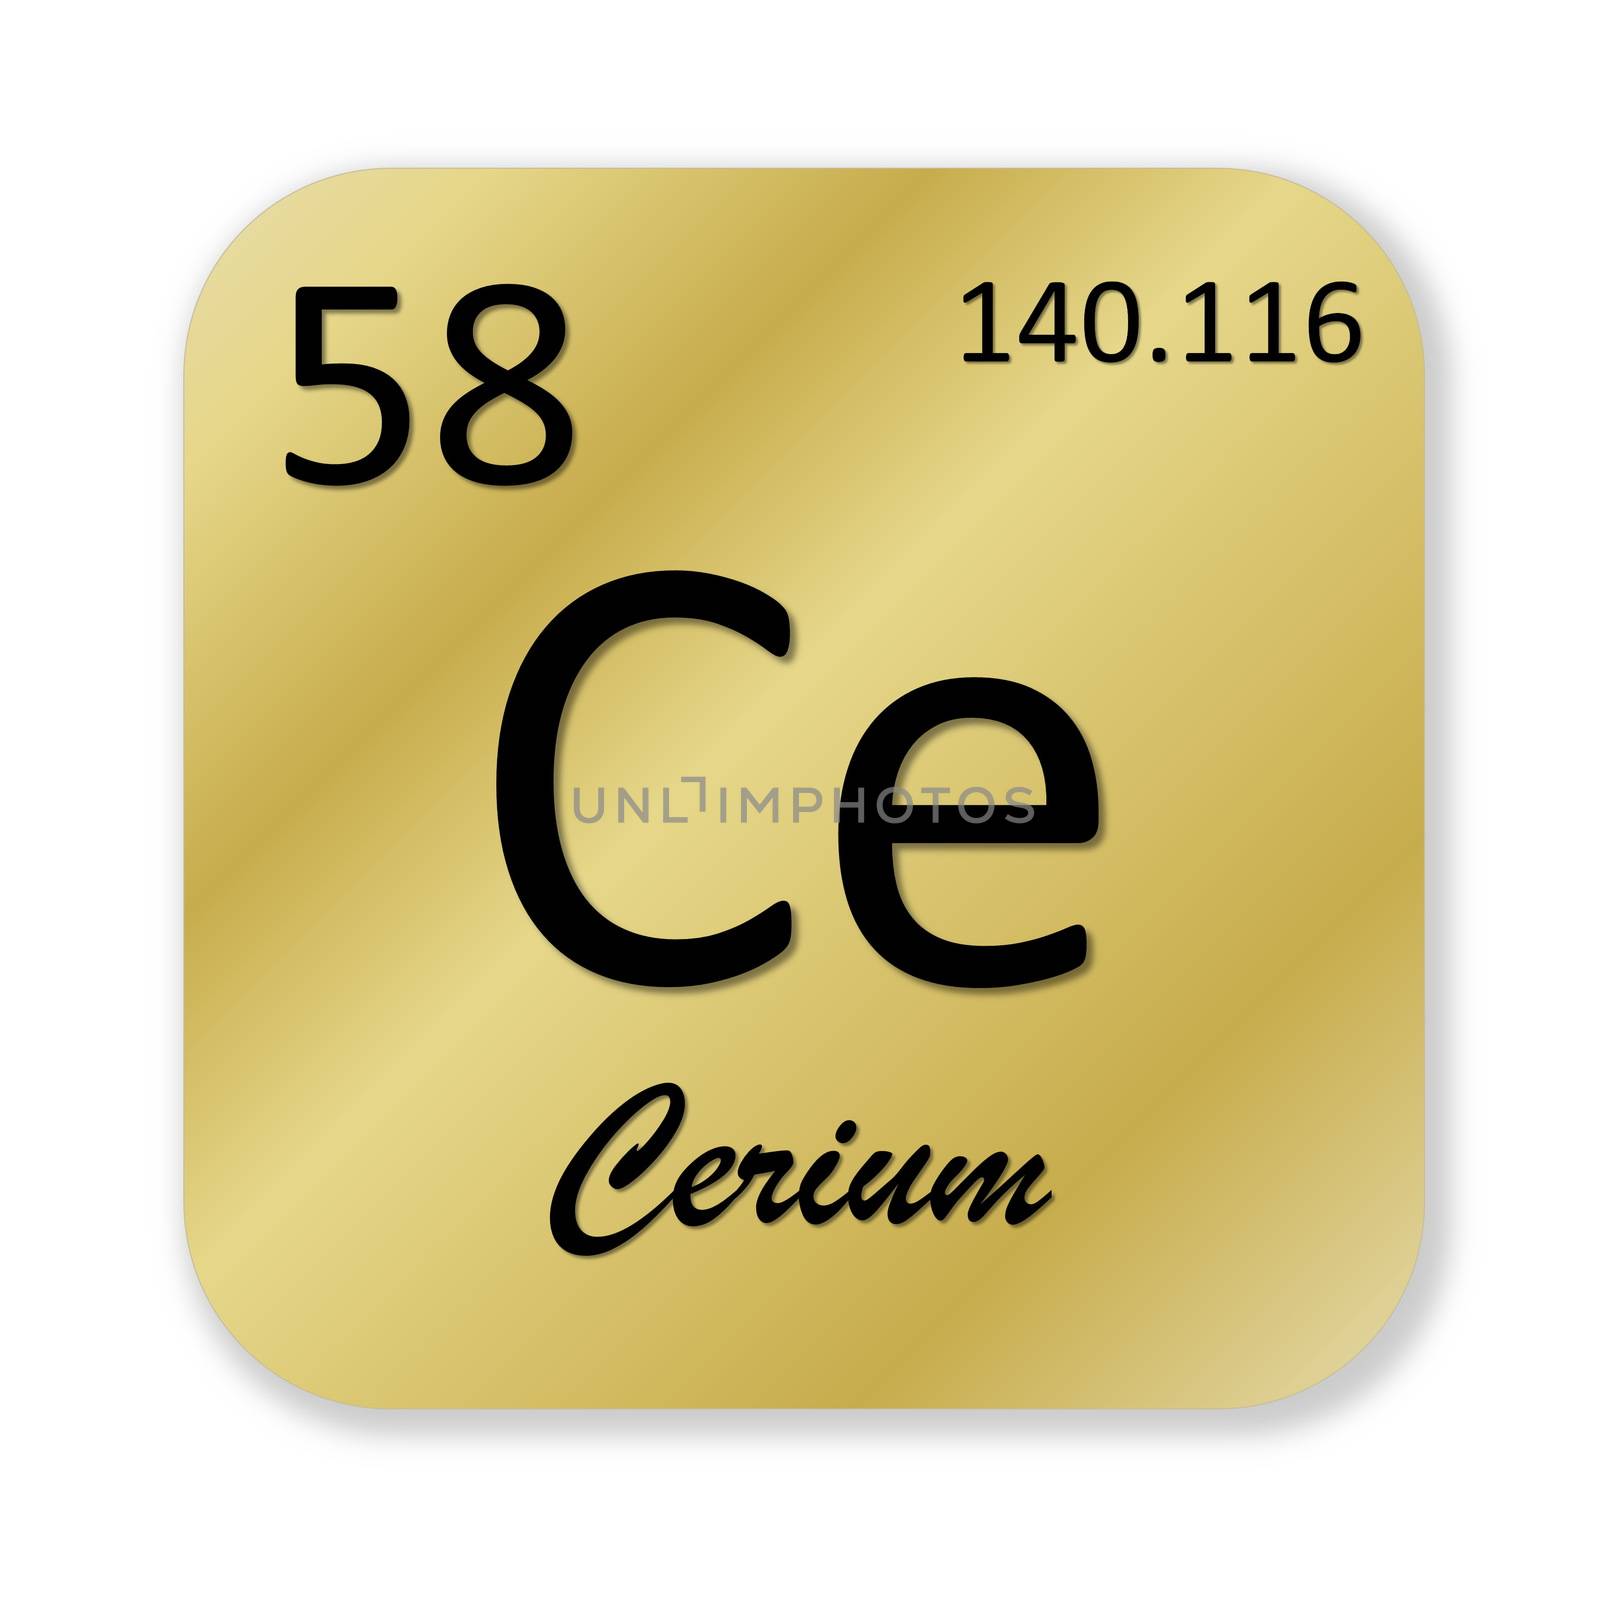 Black cerium element into golden square shape isolated in white background